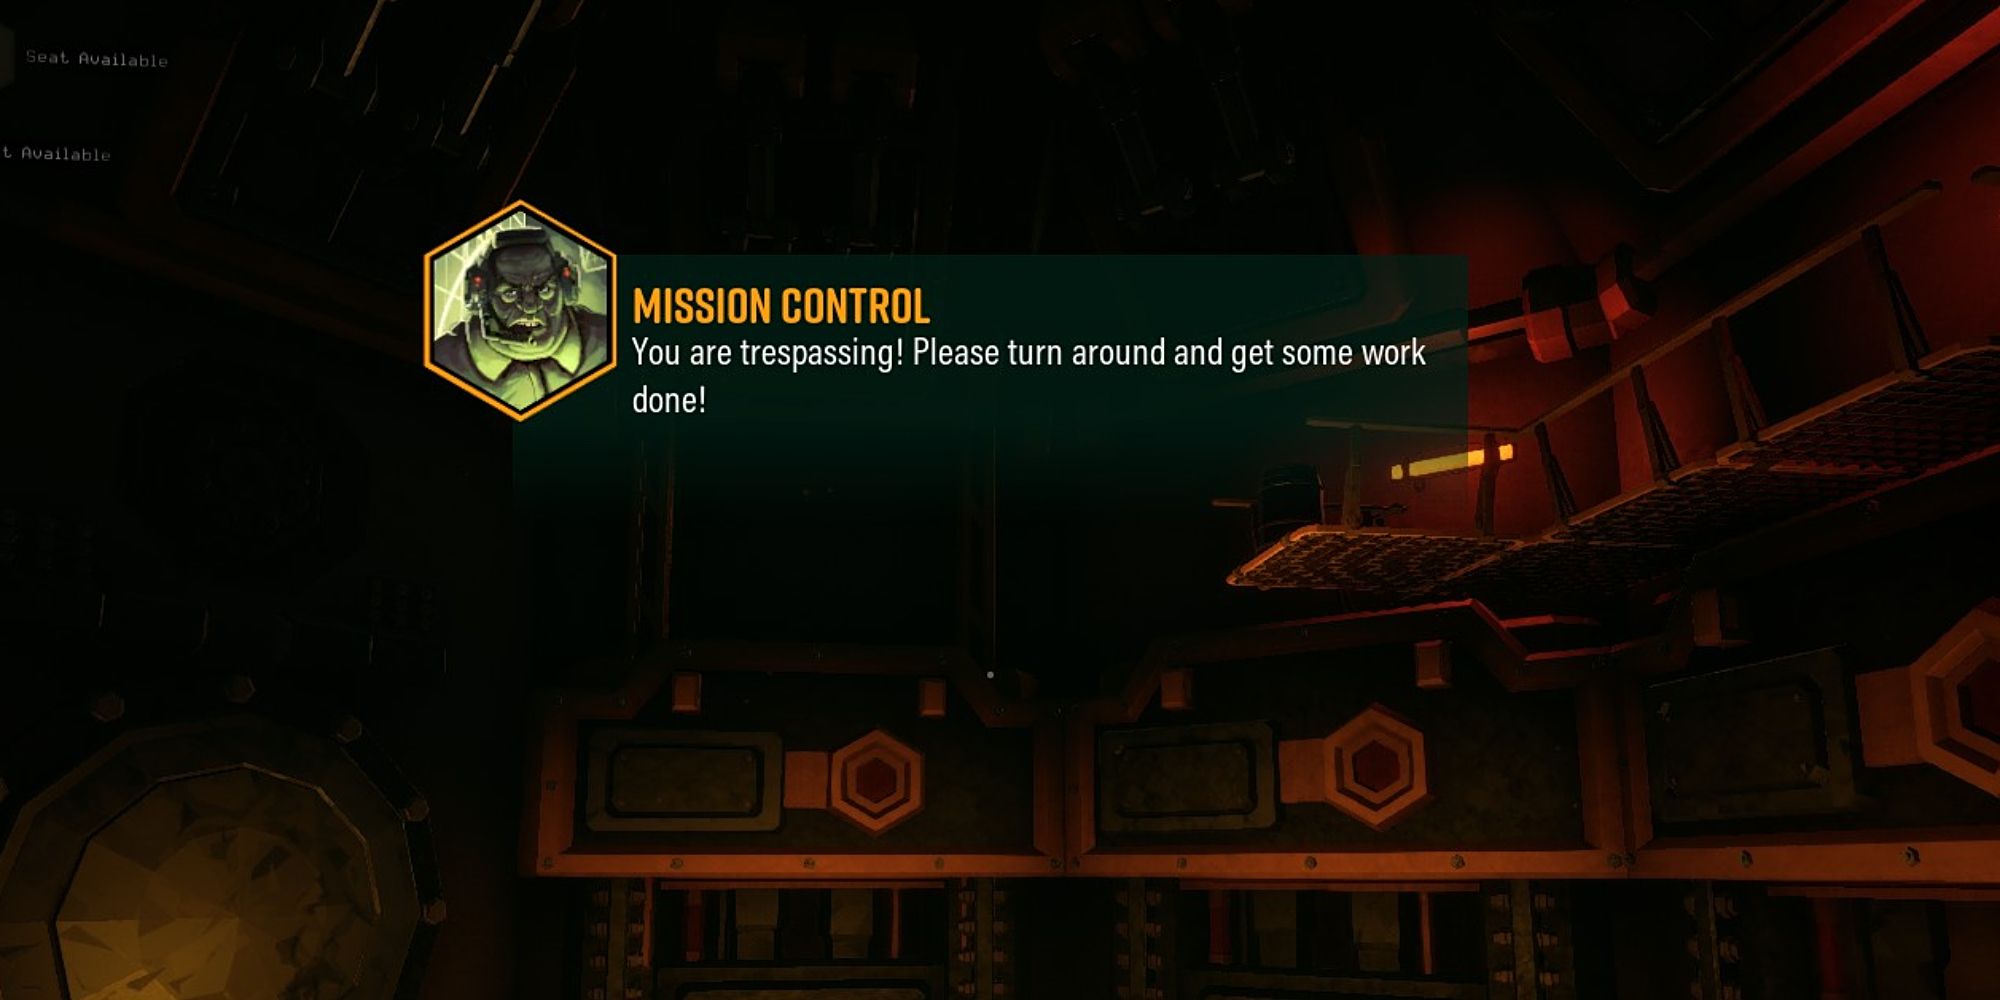 Mission Control reprimanding you as you explore the Rig in Deep Rock Galactic